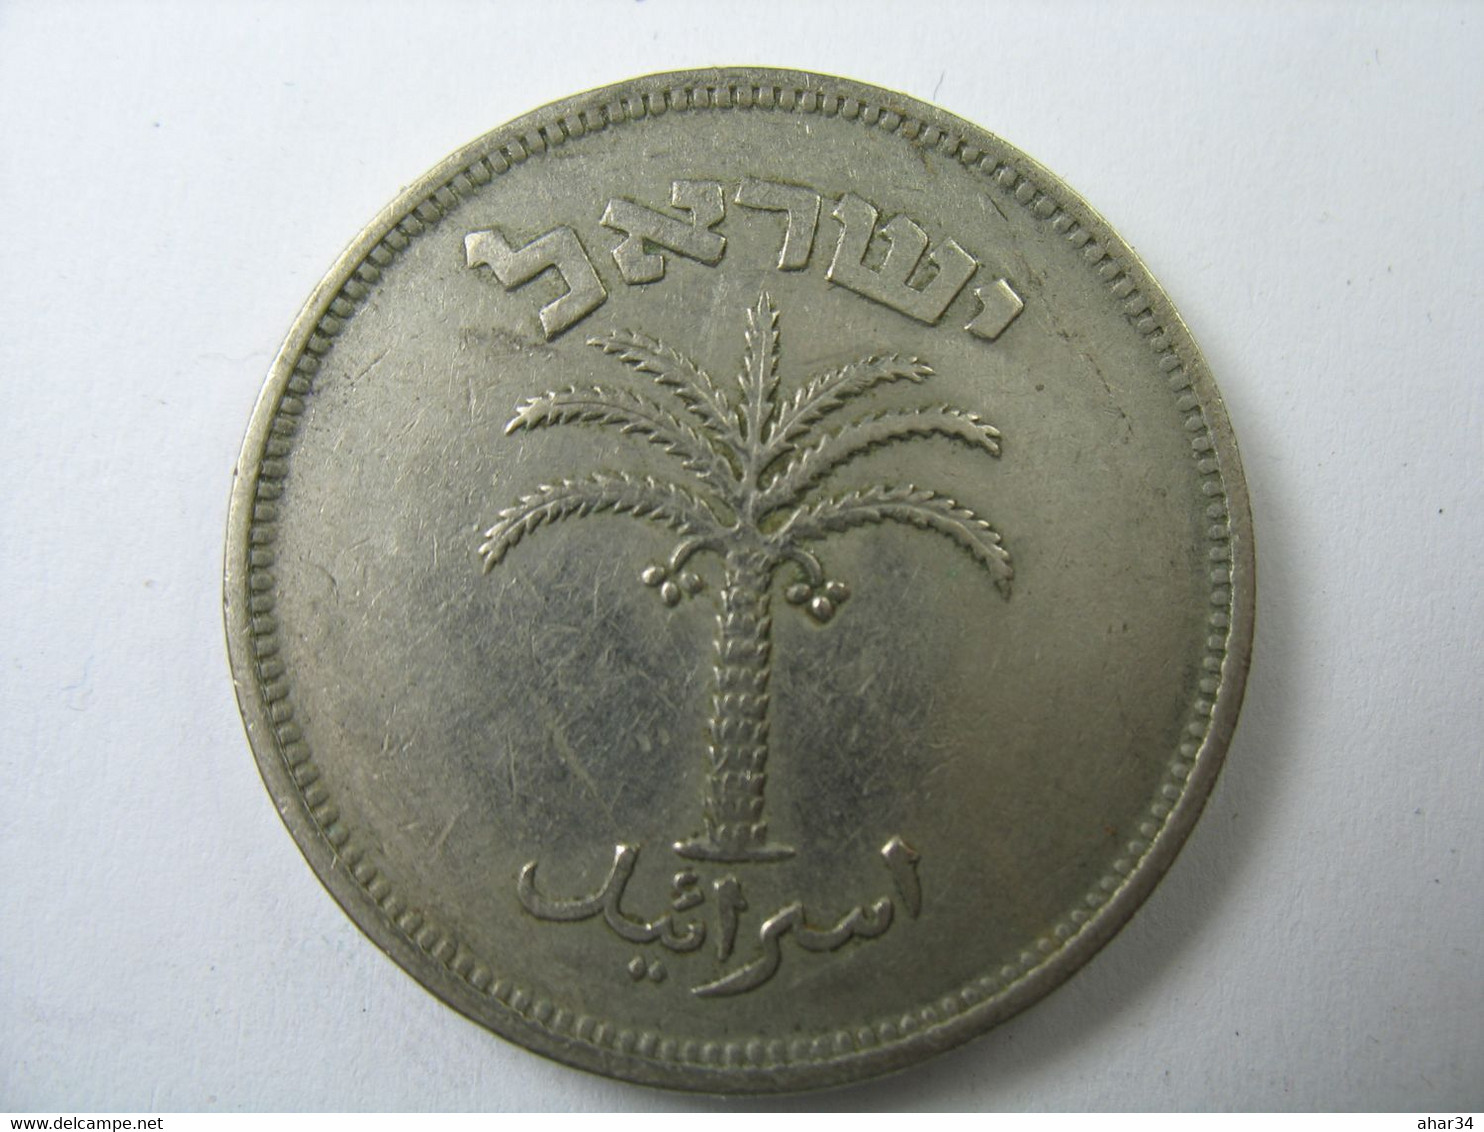 TEMPLATE LISTING ISRAEL  LOT OF  50  COINS 100 PRUTA PRUTOT 1949  COIN FREE SHIPPING  BY SURFACE REGISTERED MAIL. . - Other - Asia